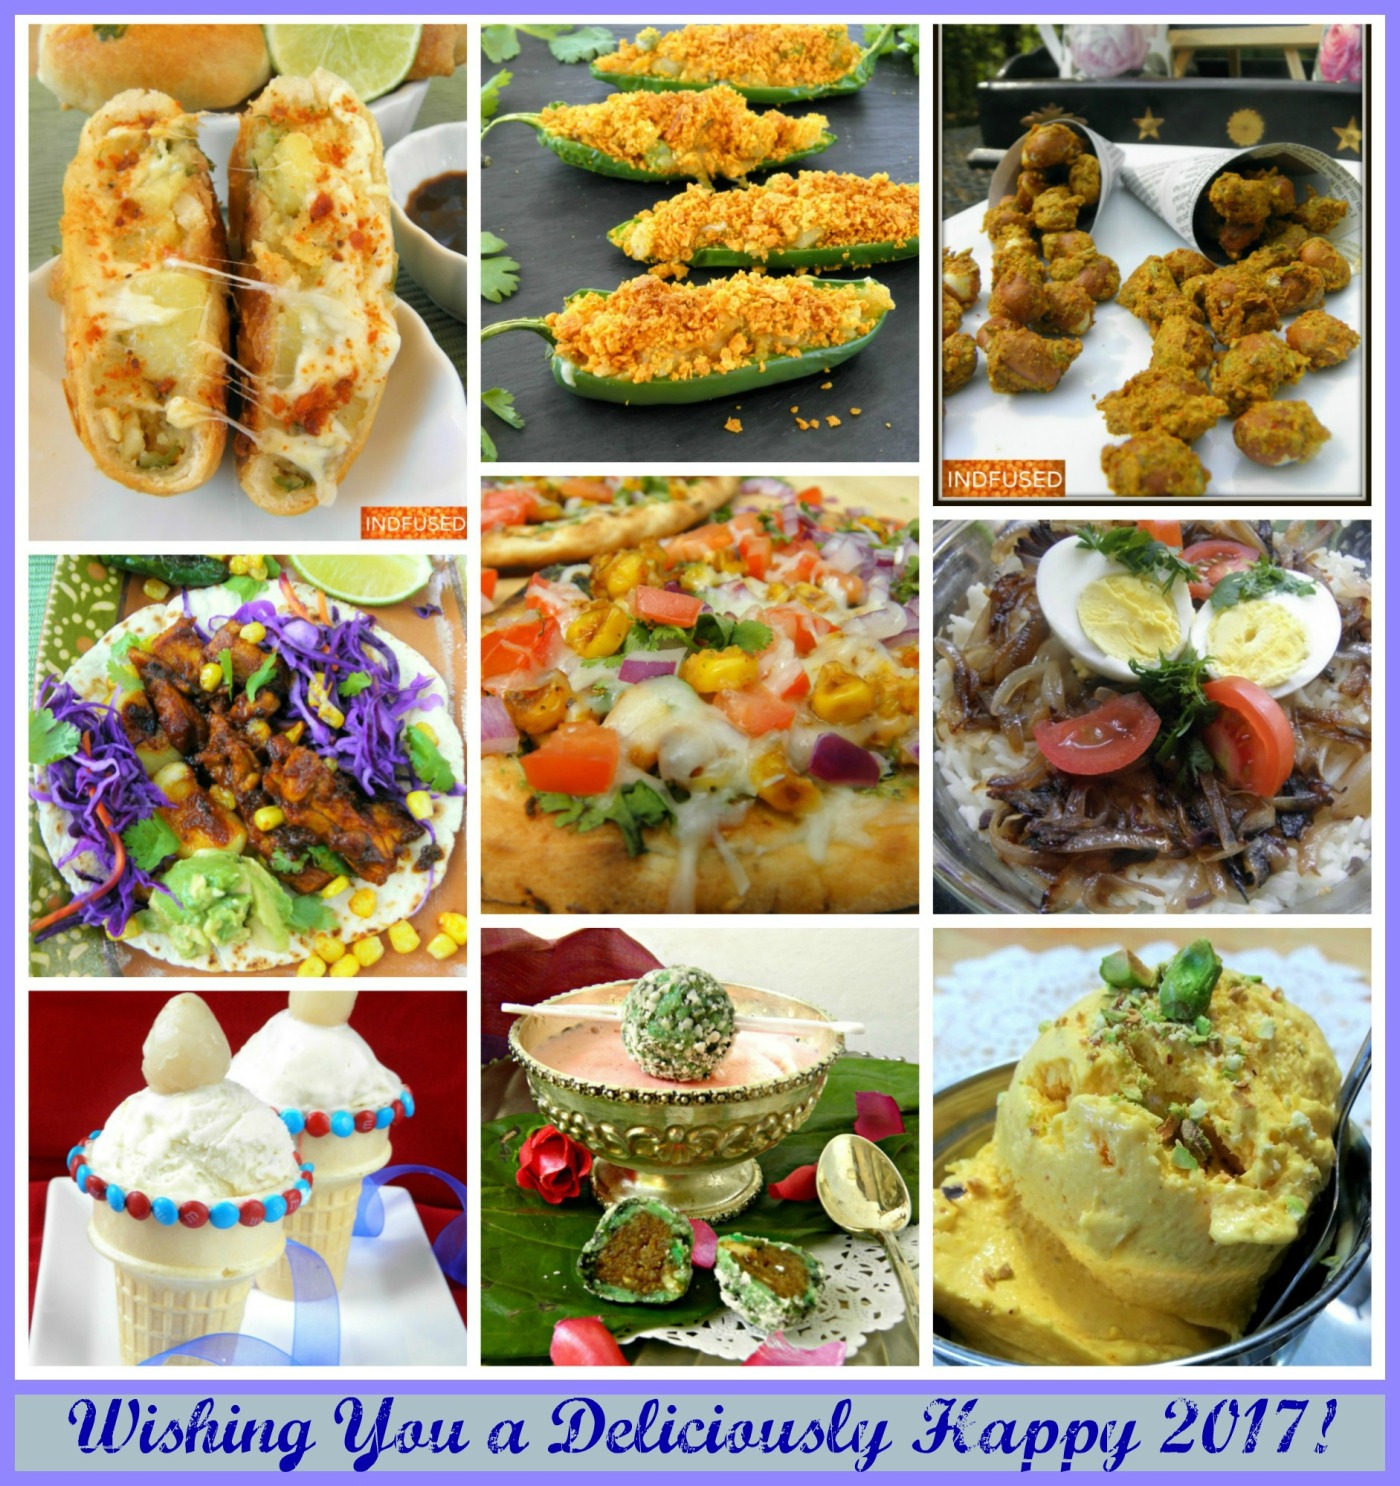 Indian and Indian fusion menu for New years party from my Indian kitchen in America!